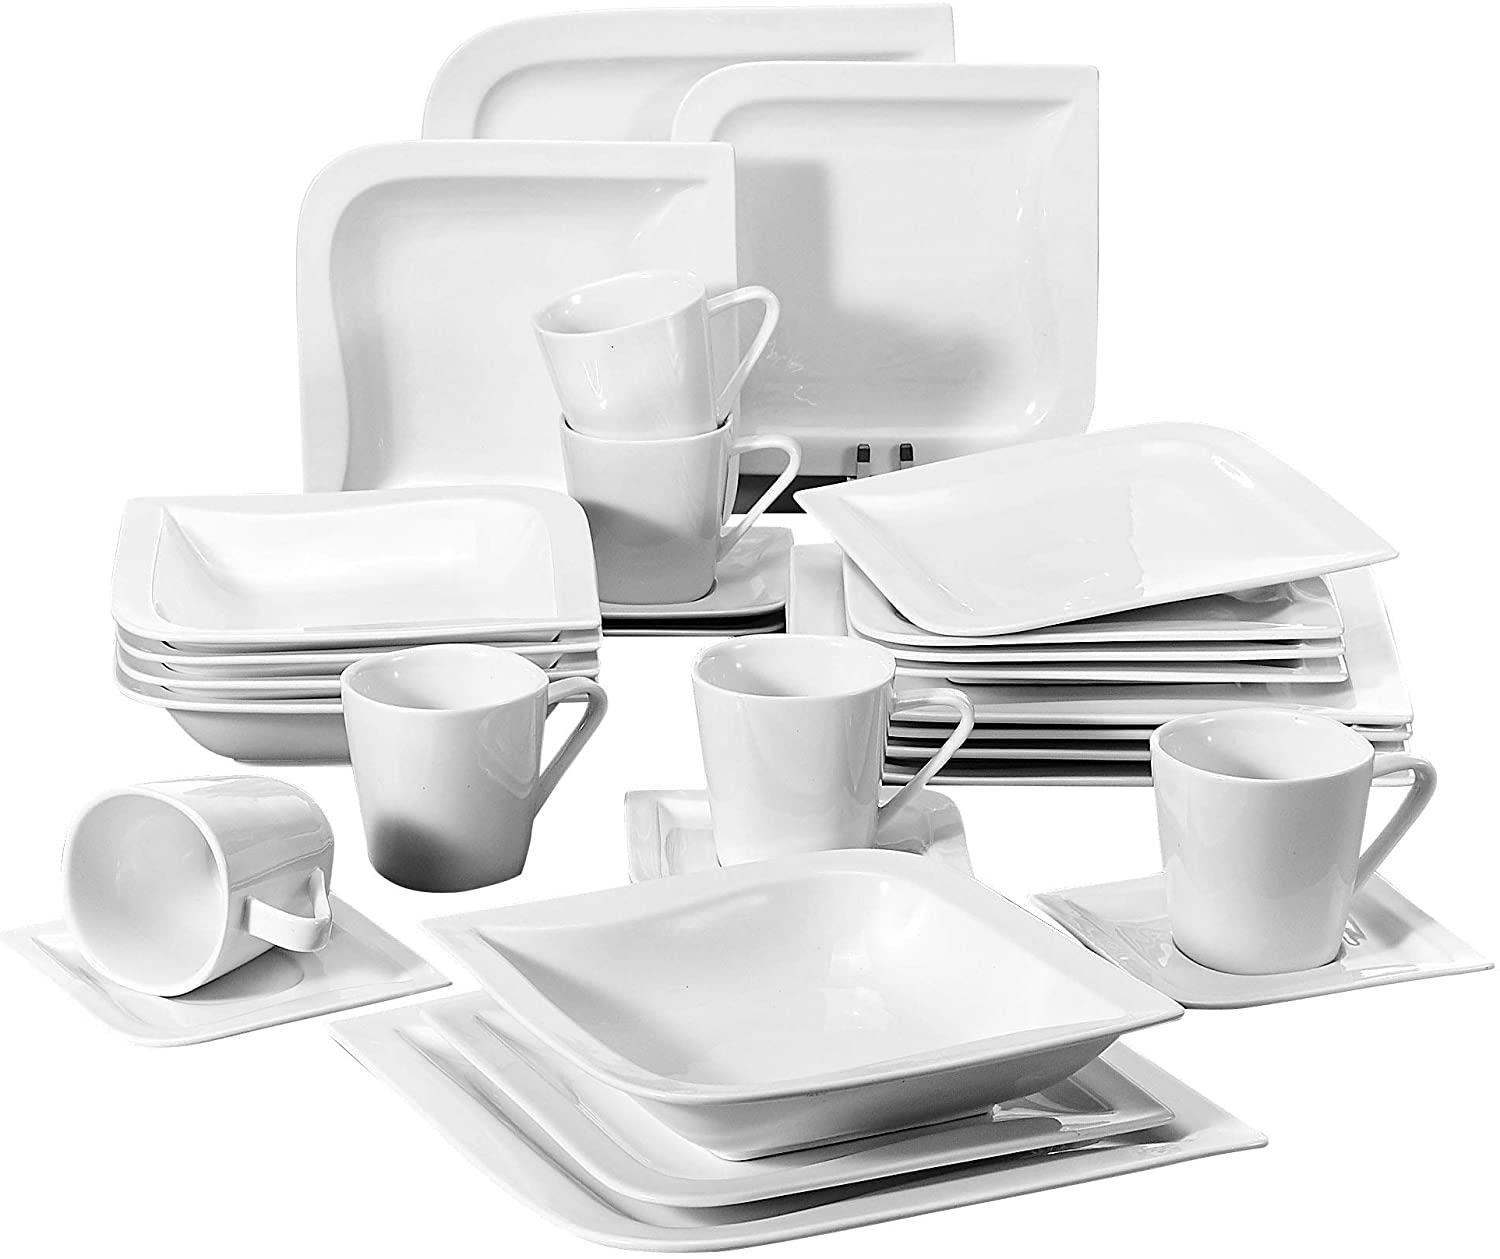 MALACASA, Joesfa Series 60 Pieces Cream White Porcelain Crockery Set Dinner Service in Elegant Design with 12 Cups, 12 Saucers, 12 Dessert Plates, 12 Soup Plates and 12 Dinner Plates